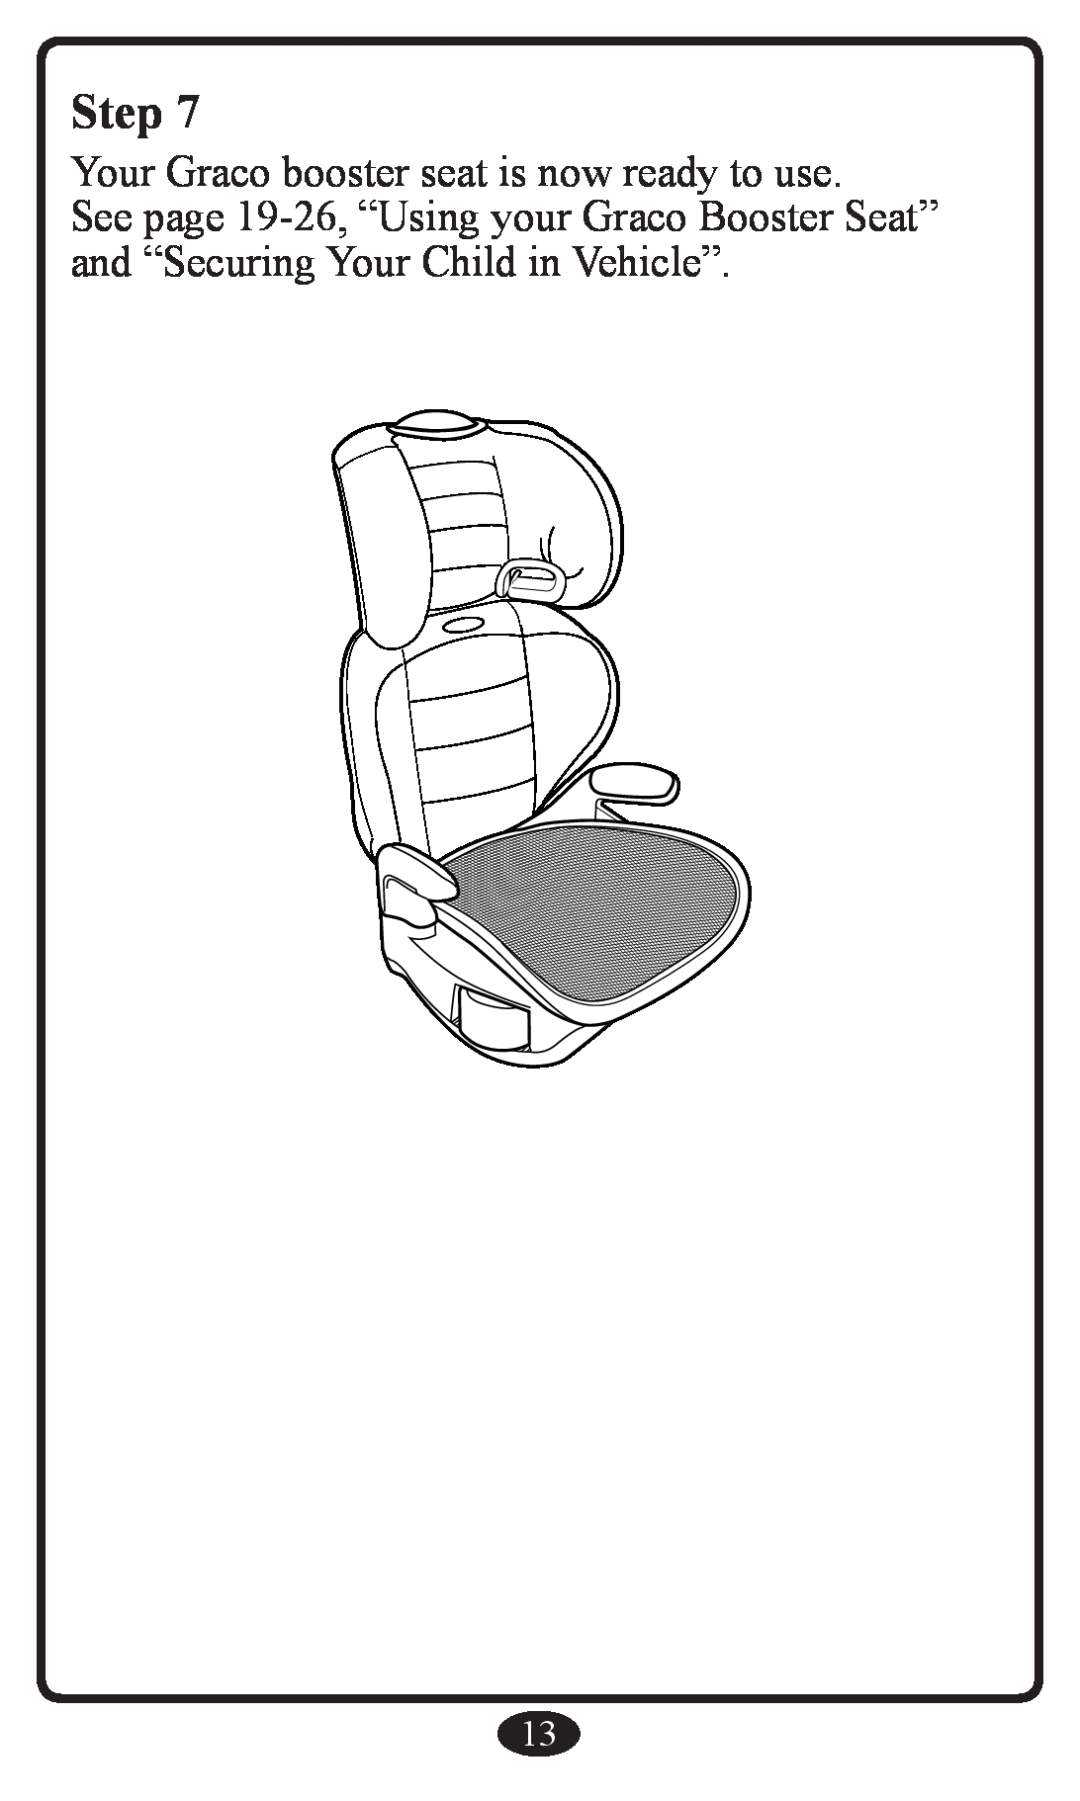 Graco Booster Seat owner manual Step, Your Graco booster seat is now ready to use 